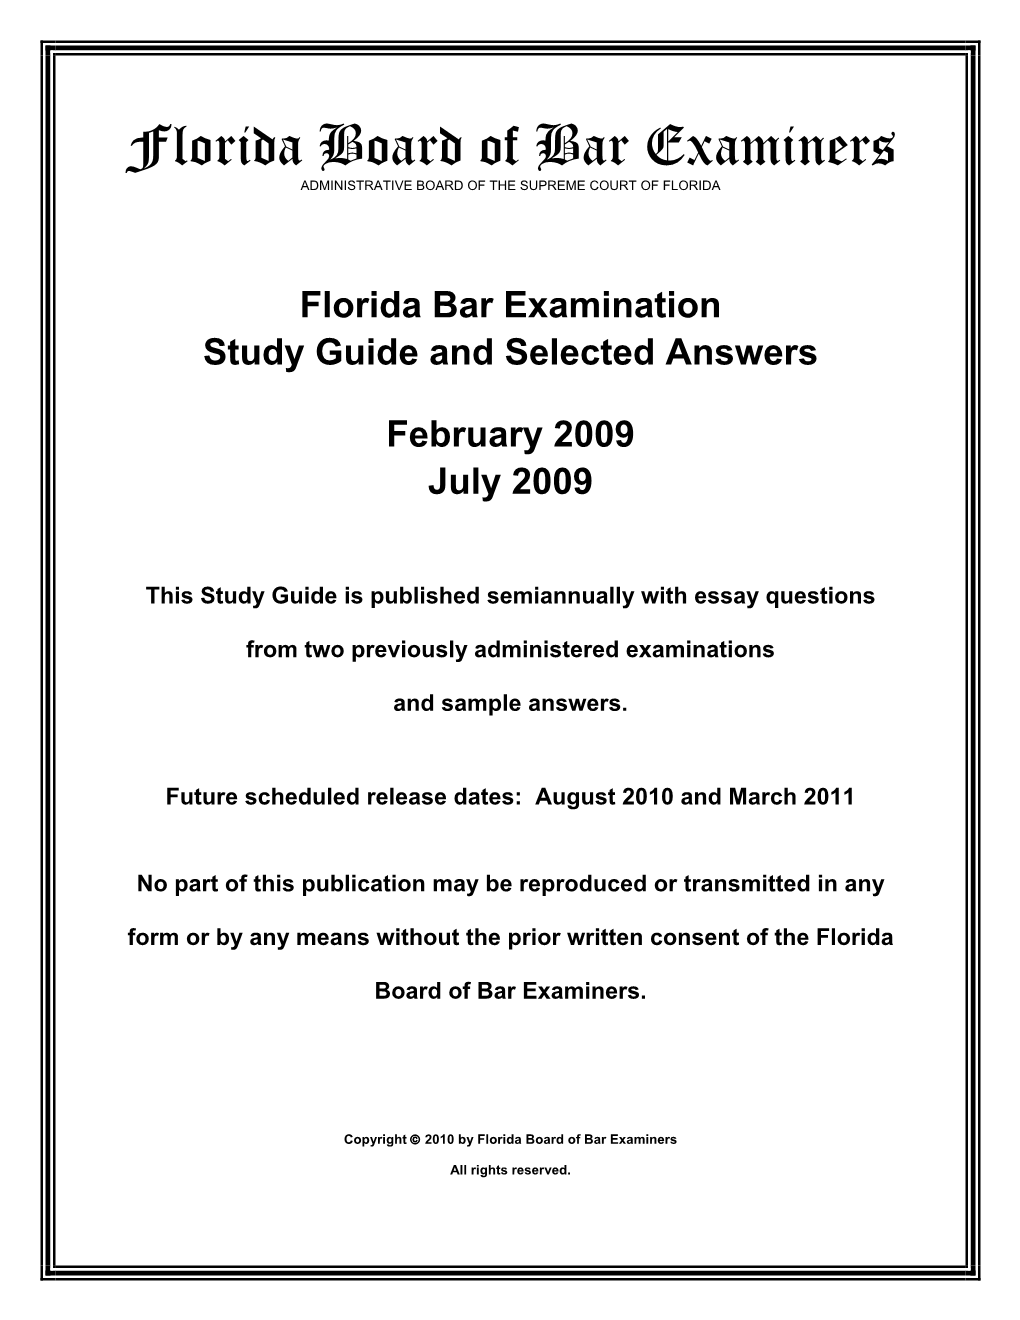 Essay Questions and Selected Answers—February 2009 and July 2009